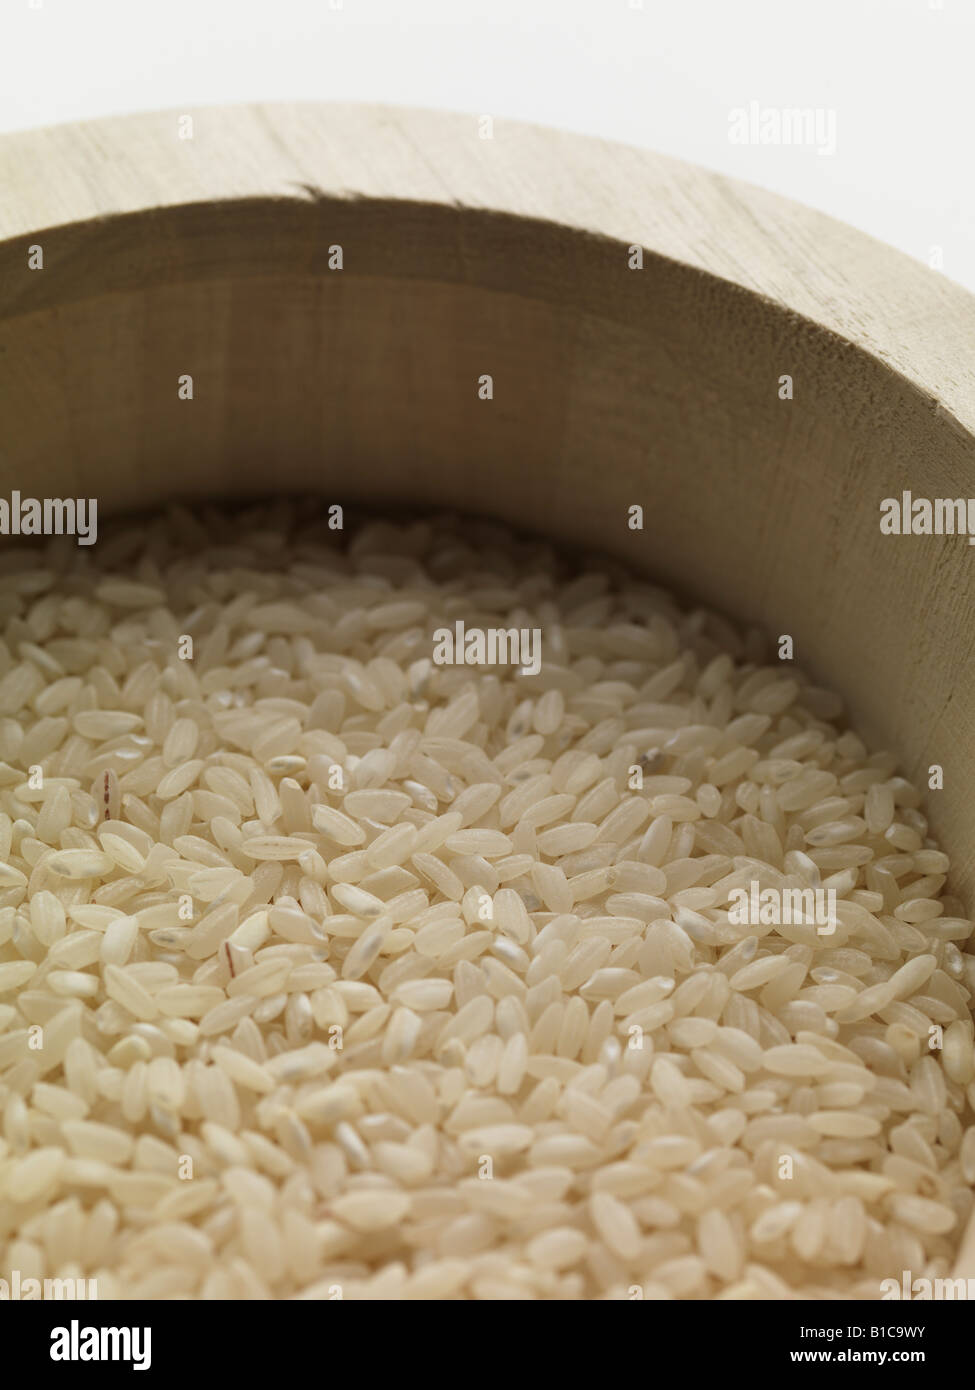 grain rice strew scatter food ingredient wood bowl Stock Photo